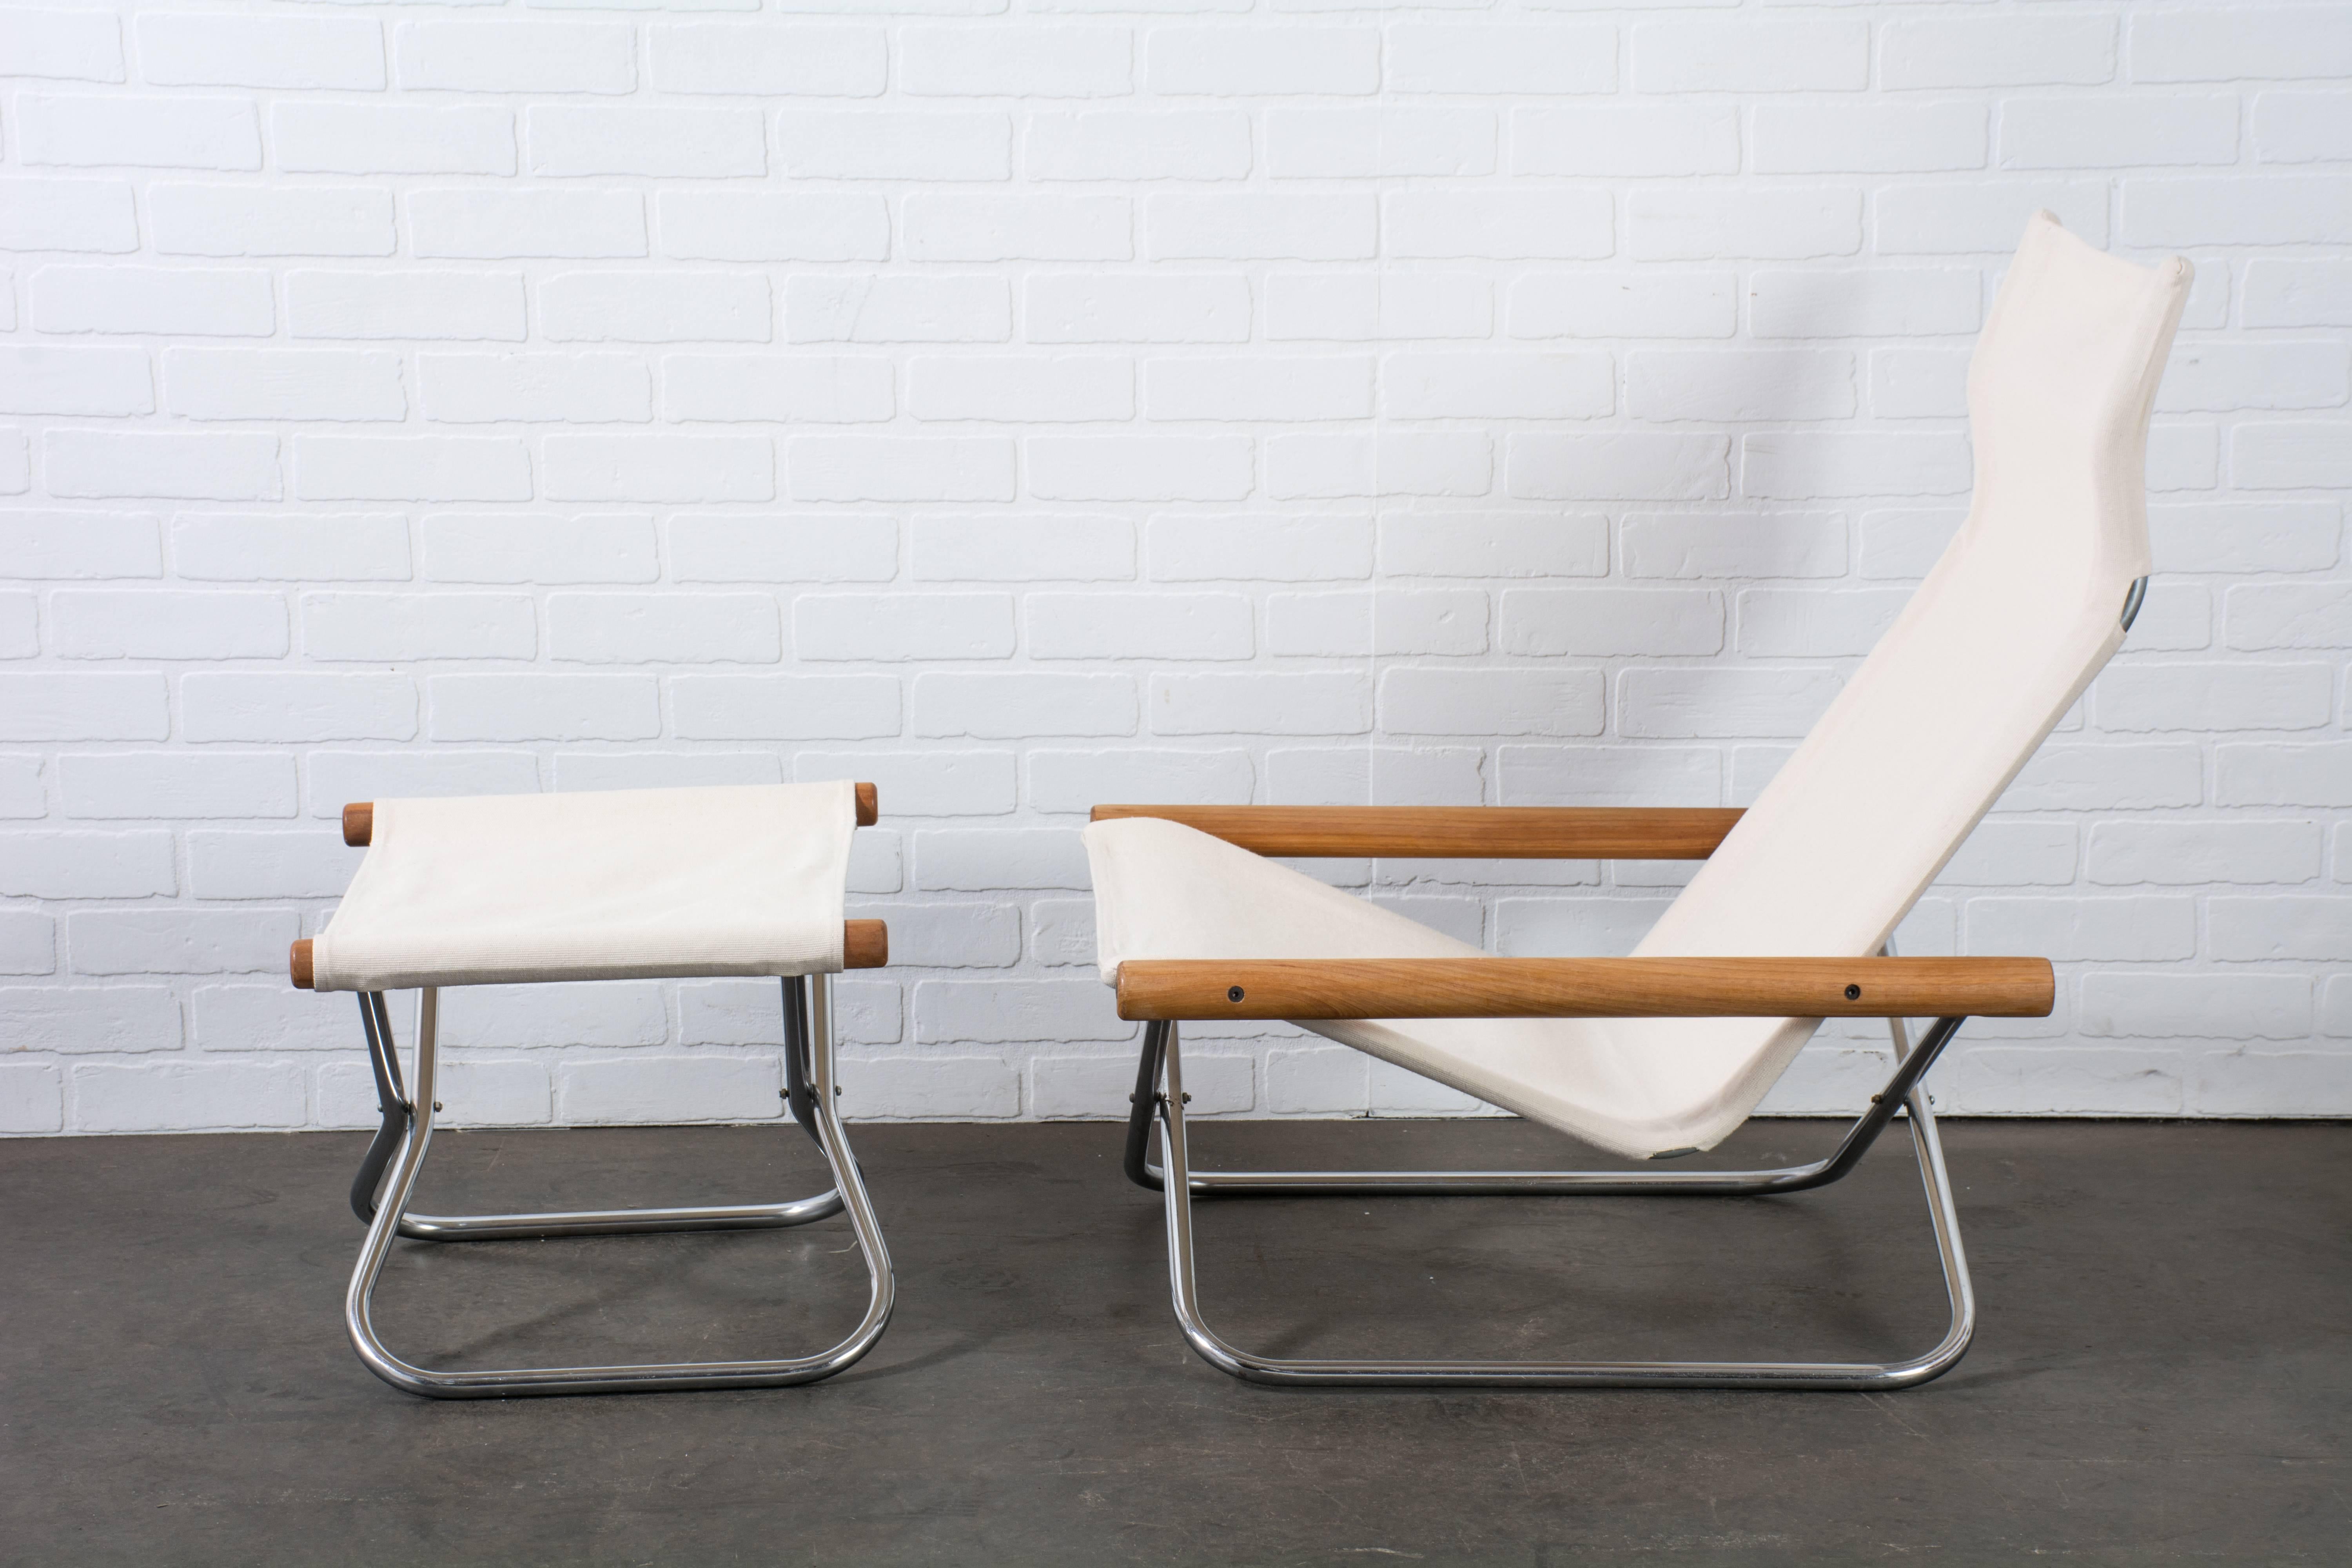 The NY folding lounge chair and ottoman was designed by Japanese designer Takeshi Nii in 1958. He was inspired by the folding form of a traditional director's chair and the simplicity and materials of Danish Modern design. The chair was named 